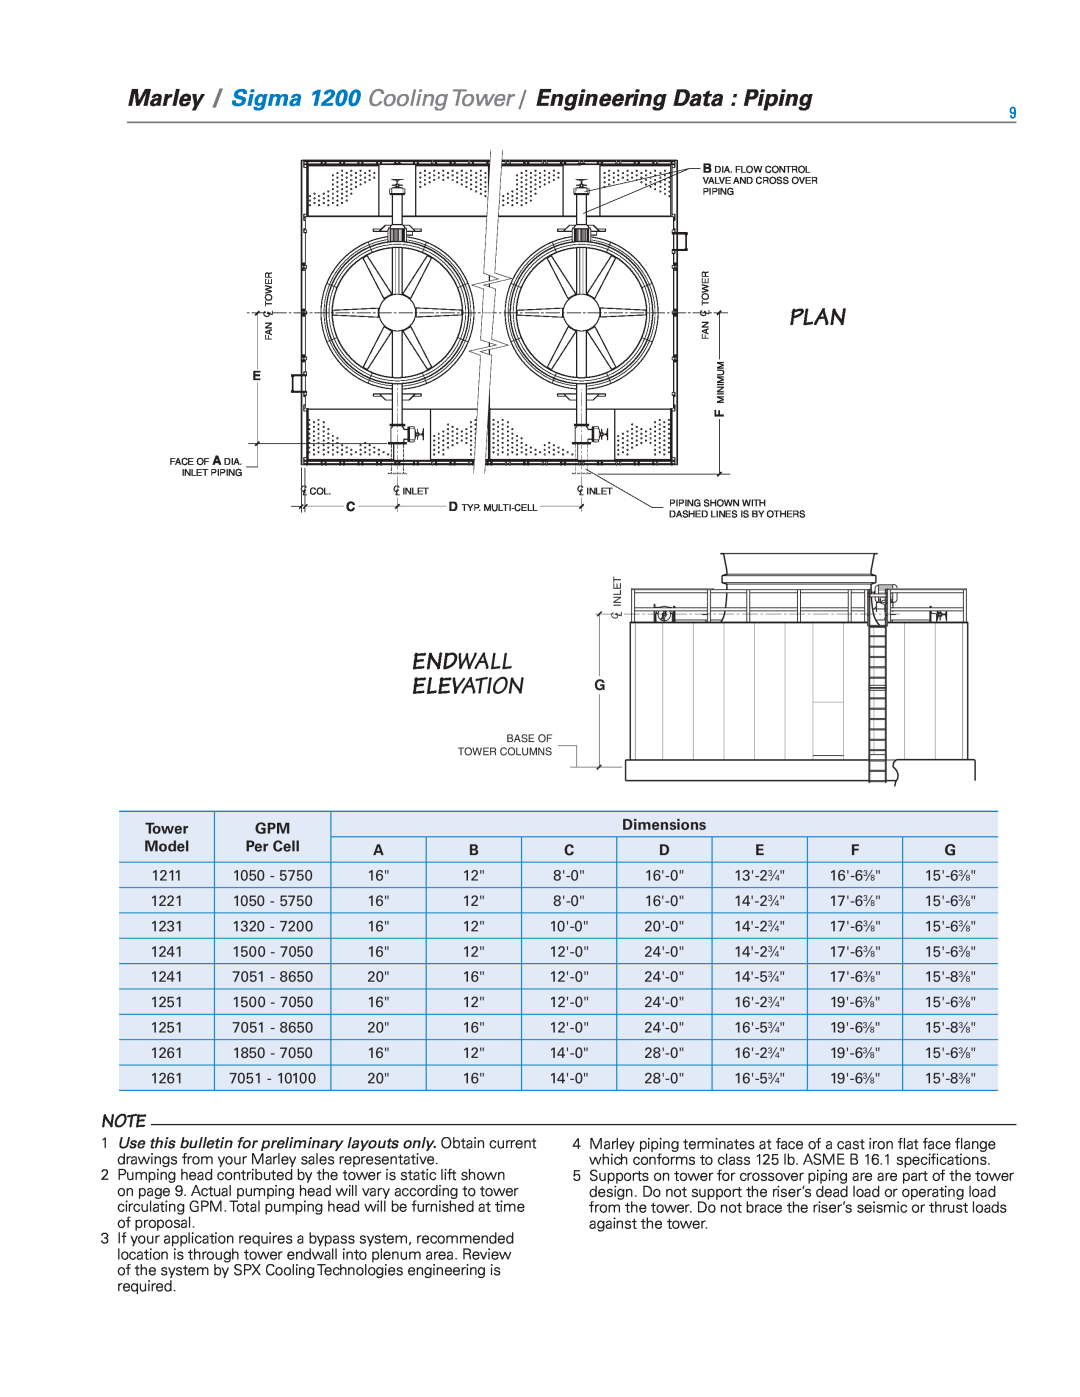 SPX Cooling Technologies 1000, 1200 specifications Endwall Elevation G, Plan, Tower, Dimensions, Model, Per Cell 